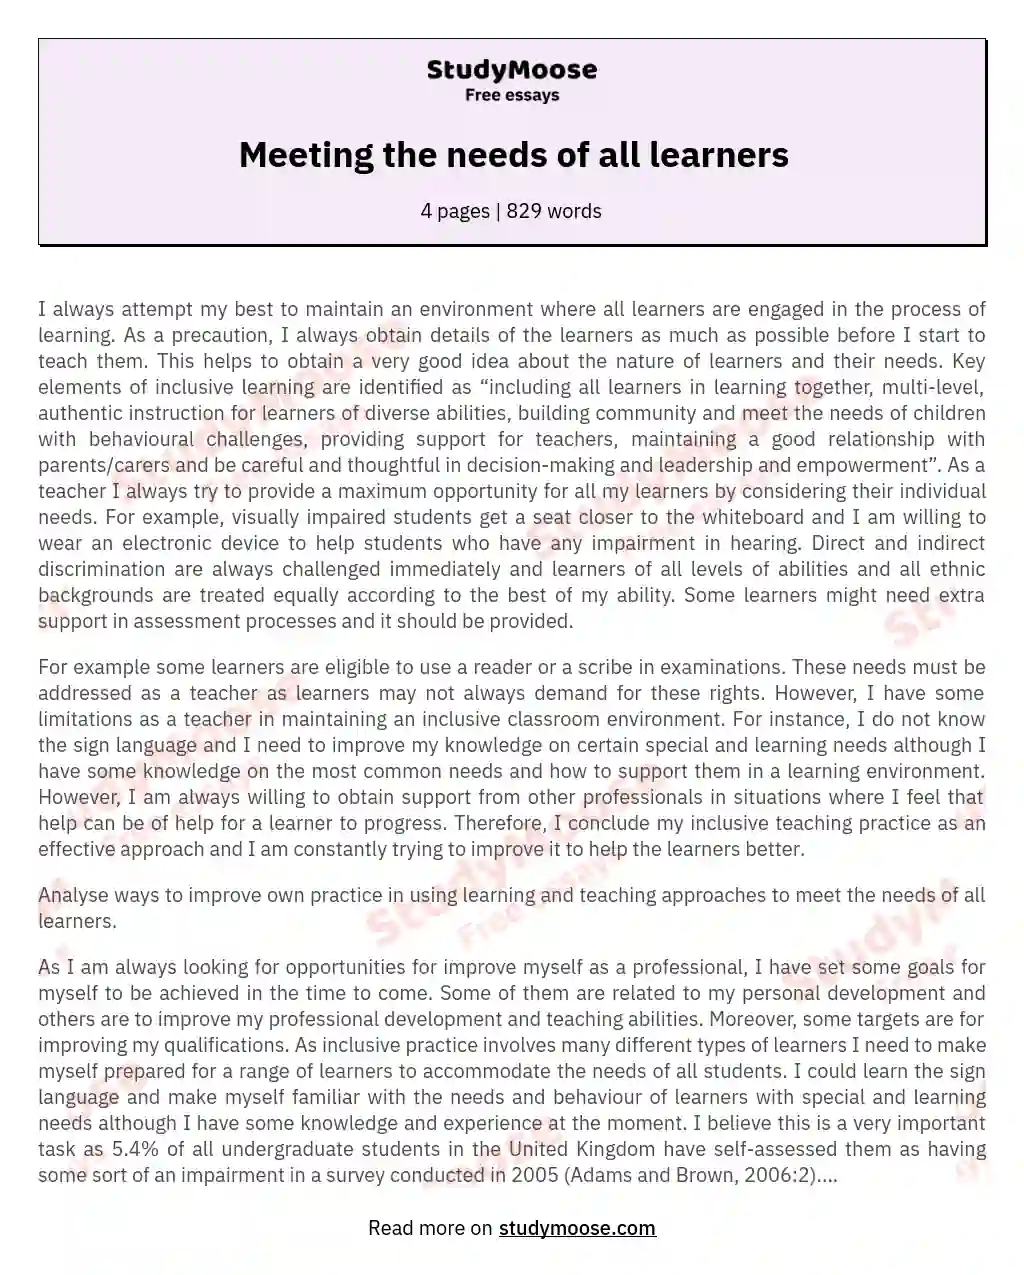 Meeting the needs of all learners essay